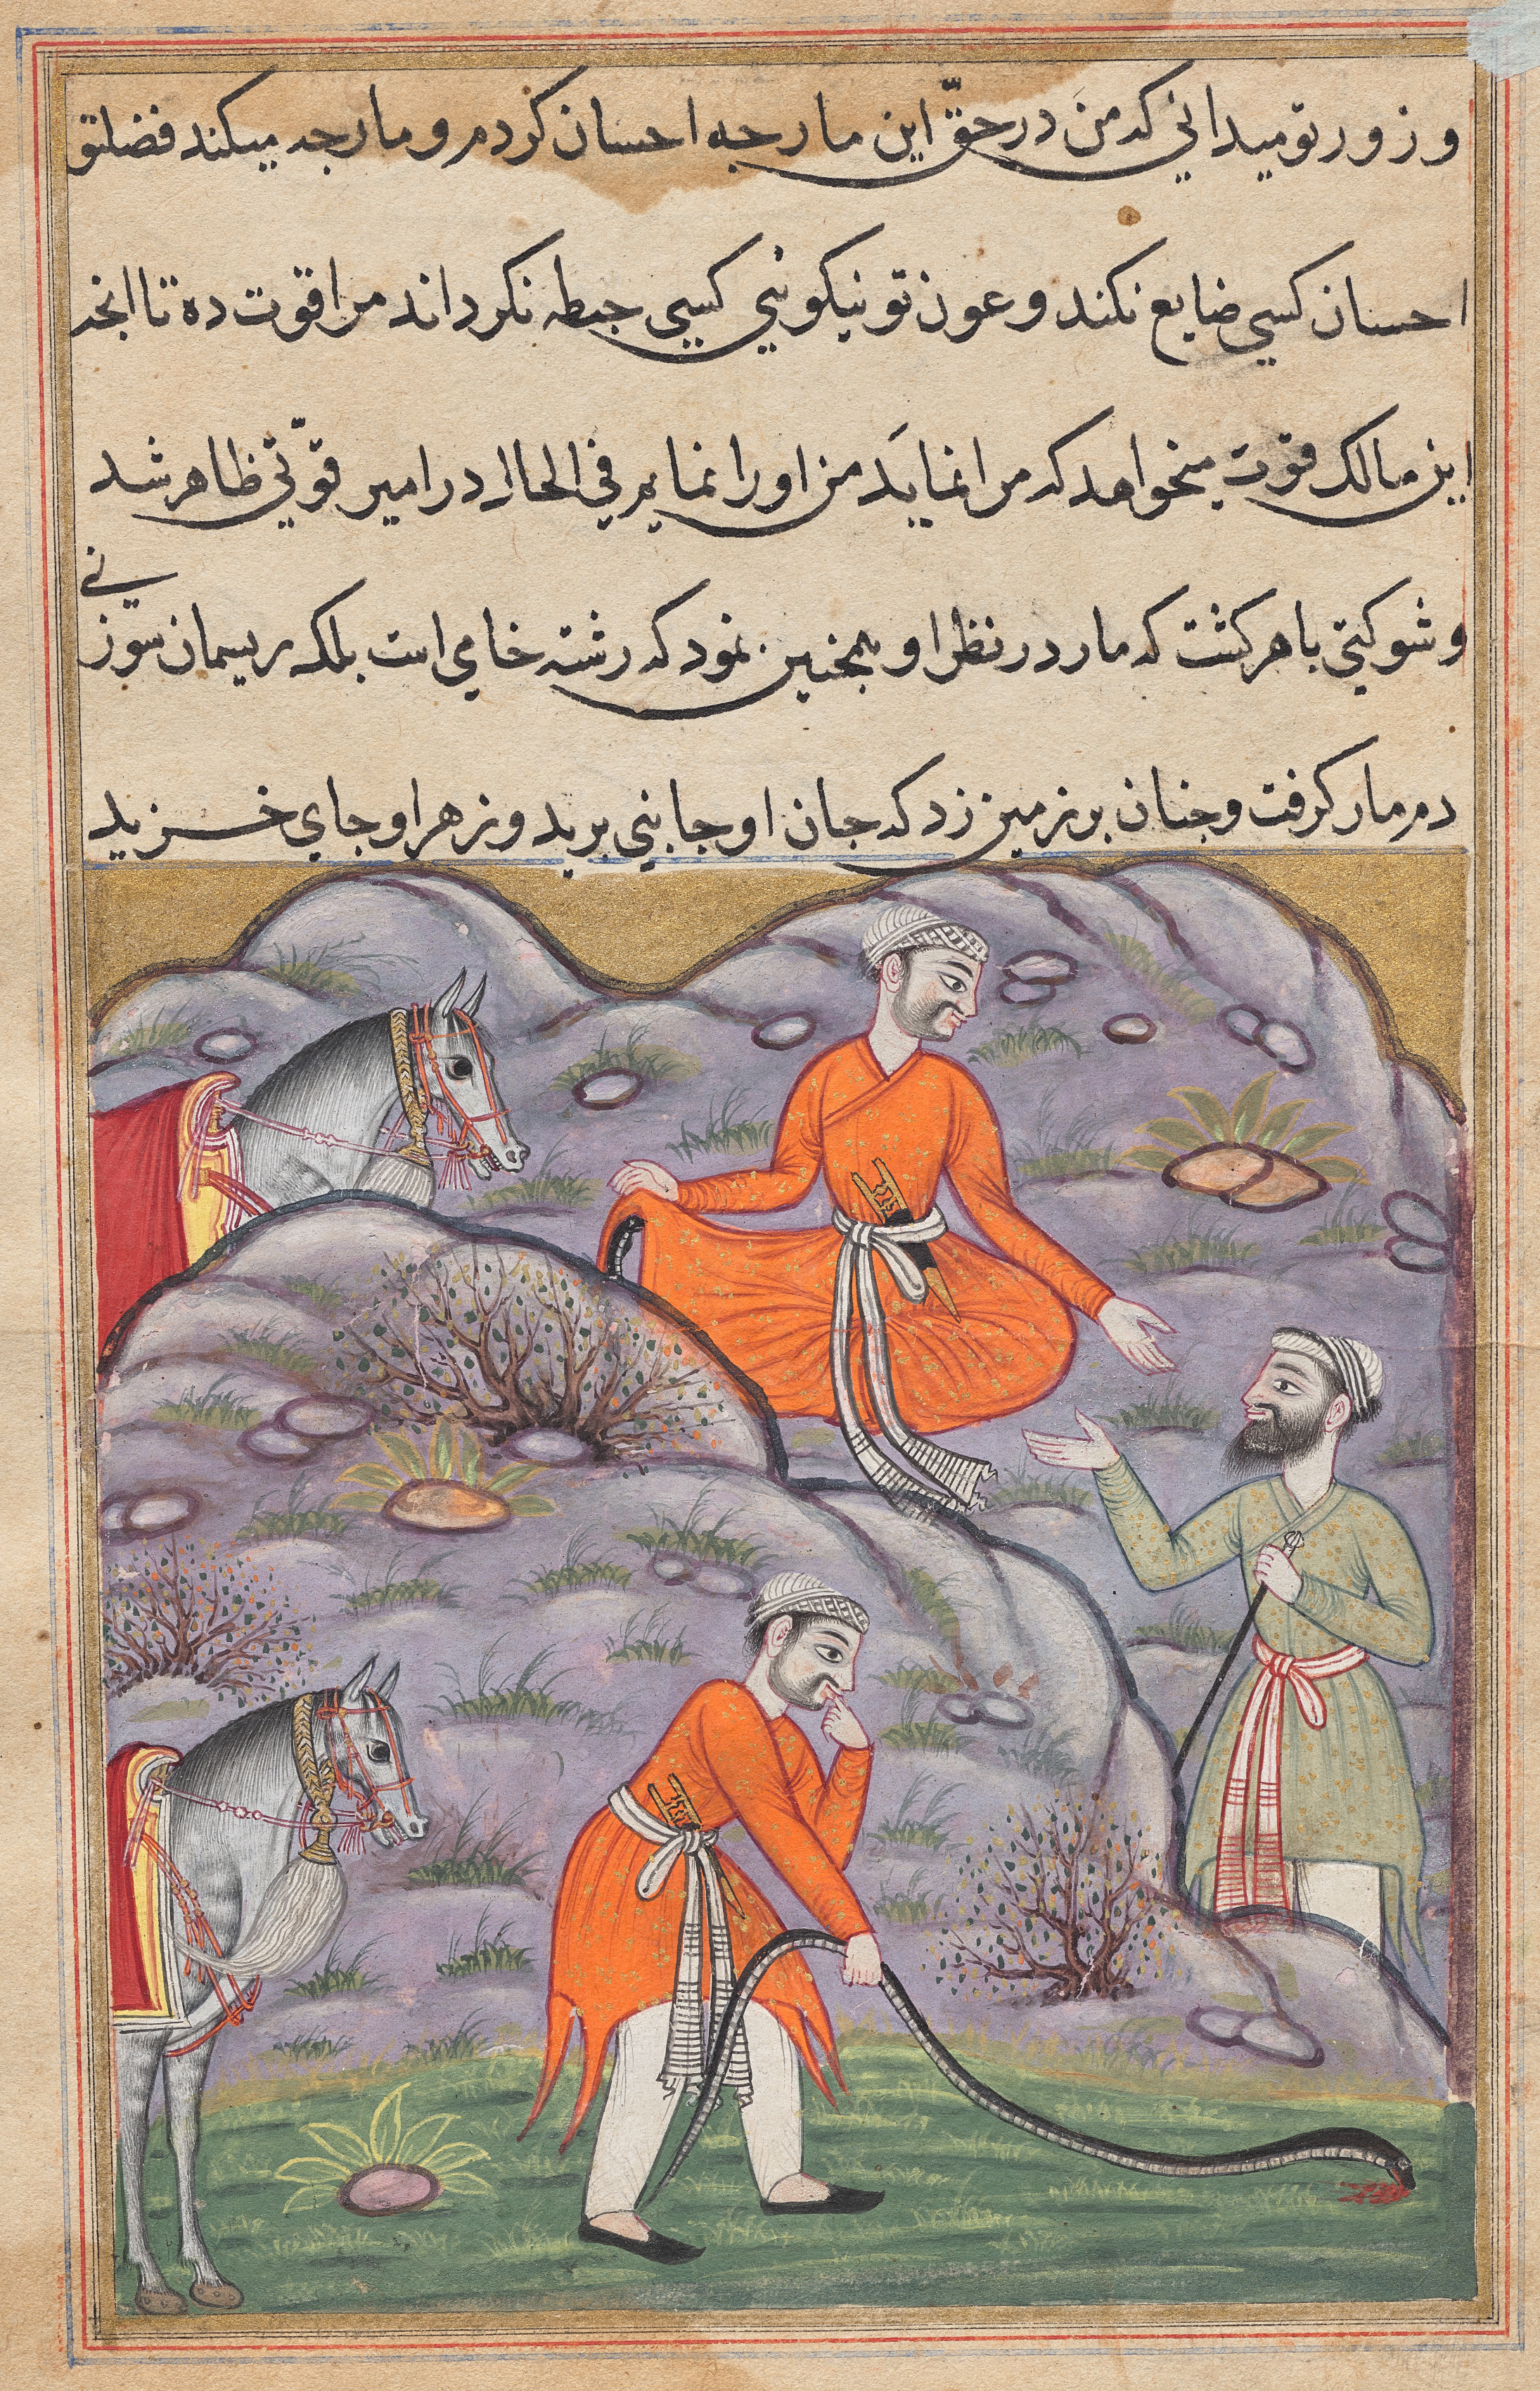 The Emir slays the snake after giving it shelter, from a Tuti-nama (Tales of a Parrot): Forty-fifth Night